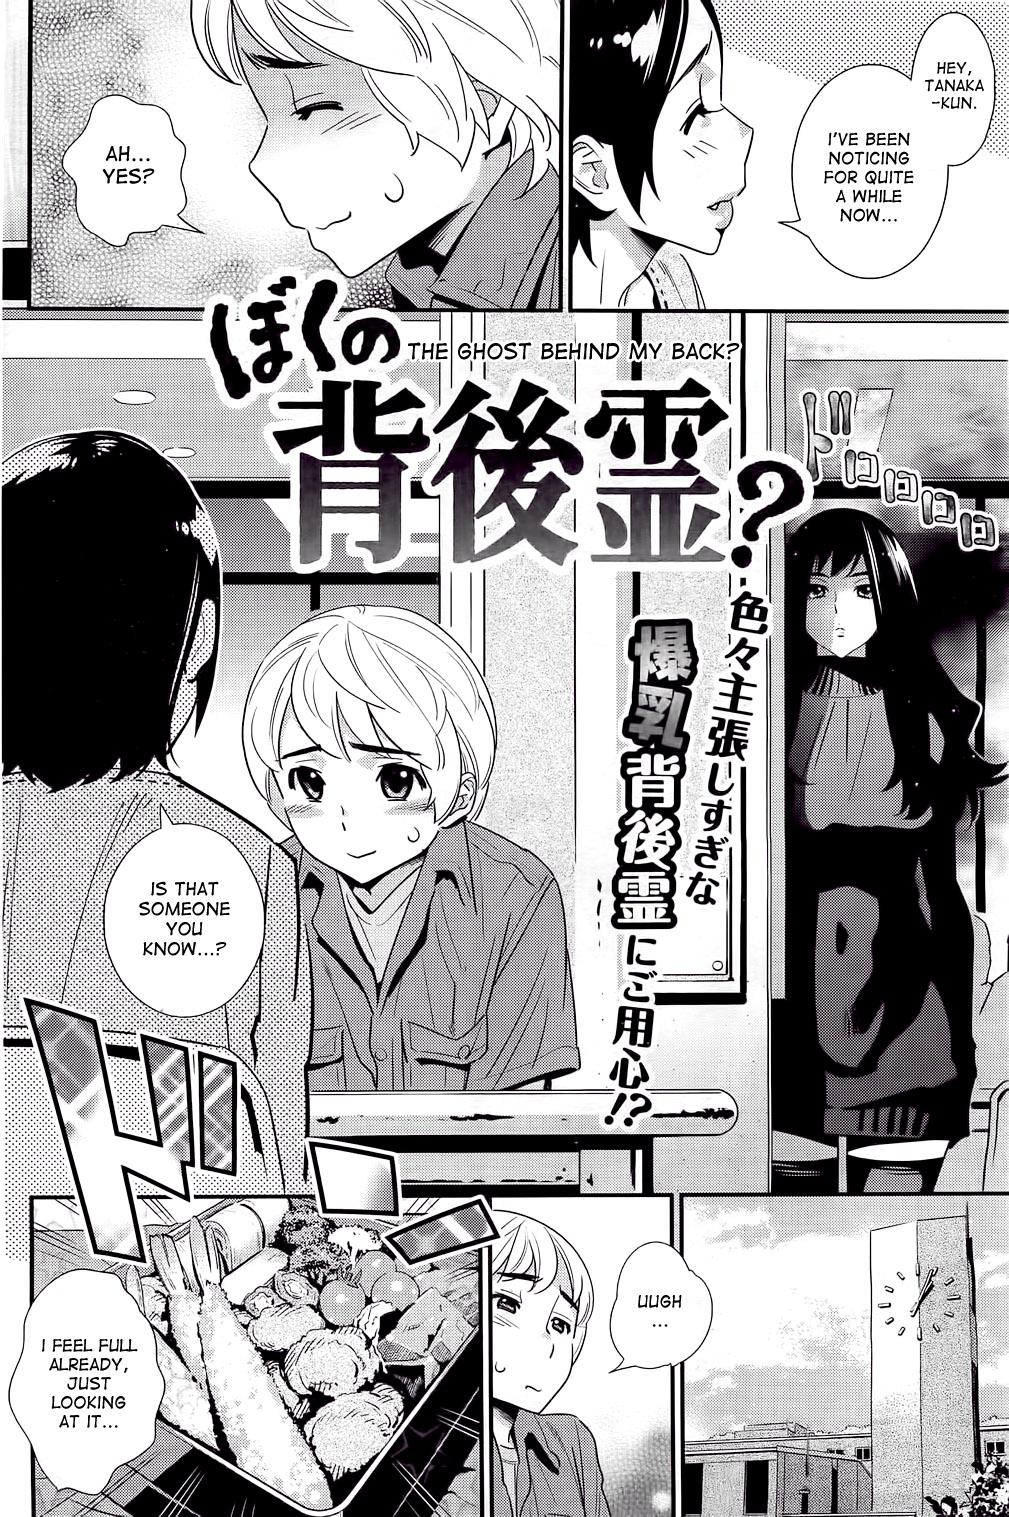 New Boku no Haigorei? | The Ghost Behind My Back? Jacking - Page 2